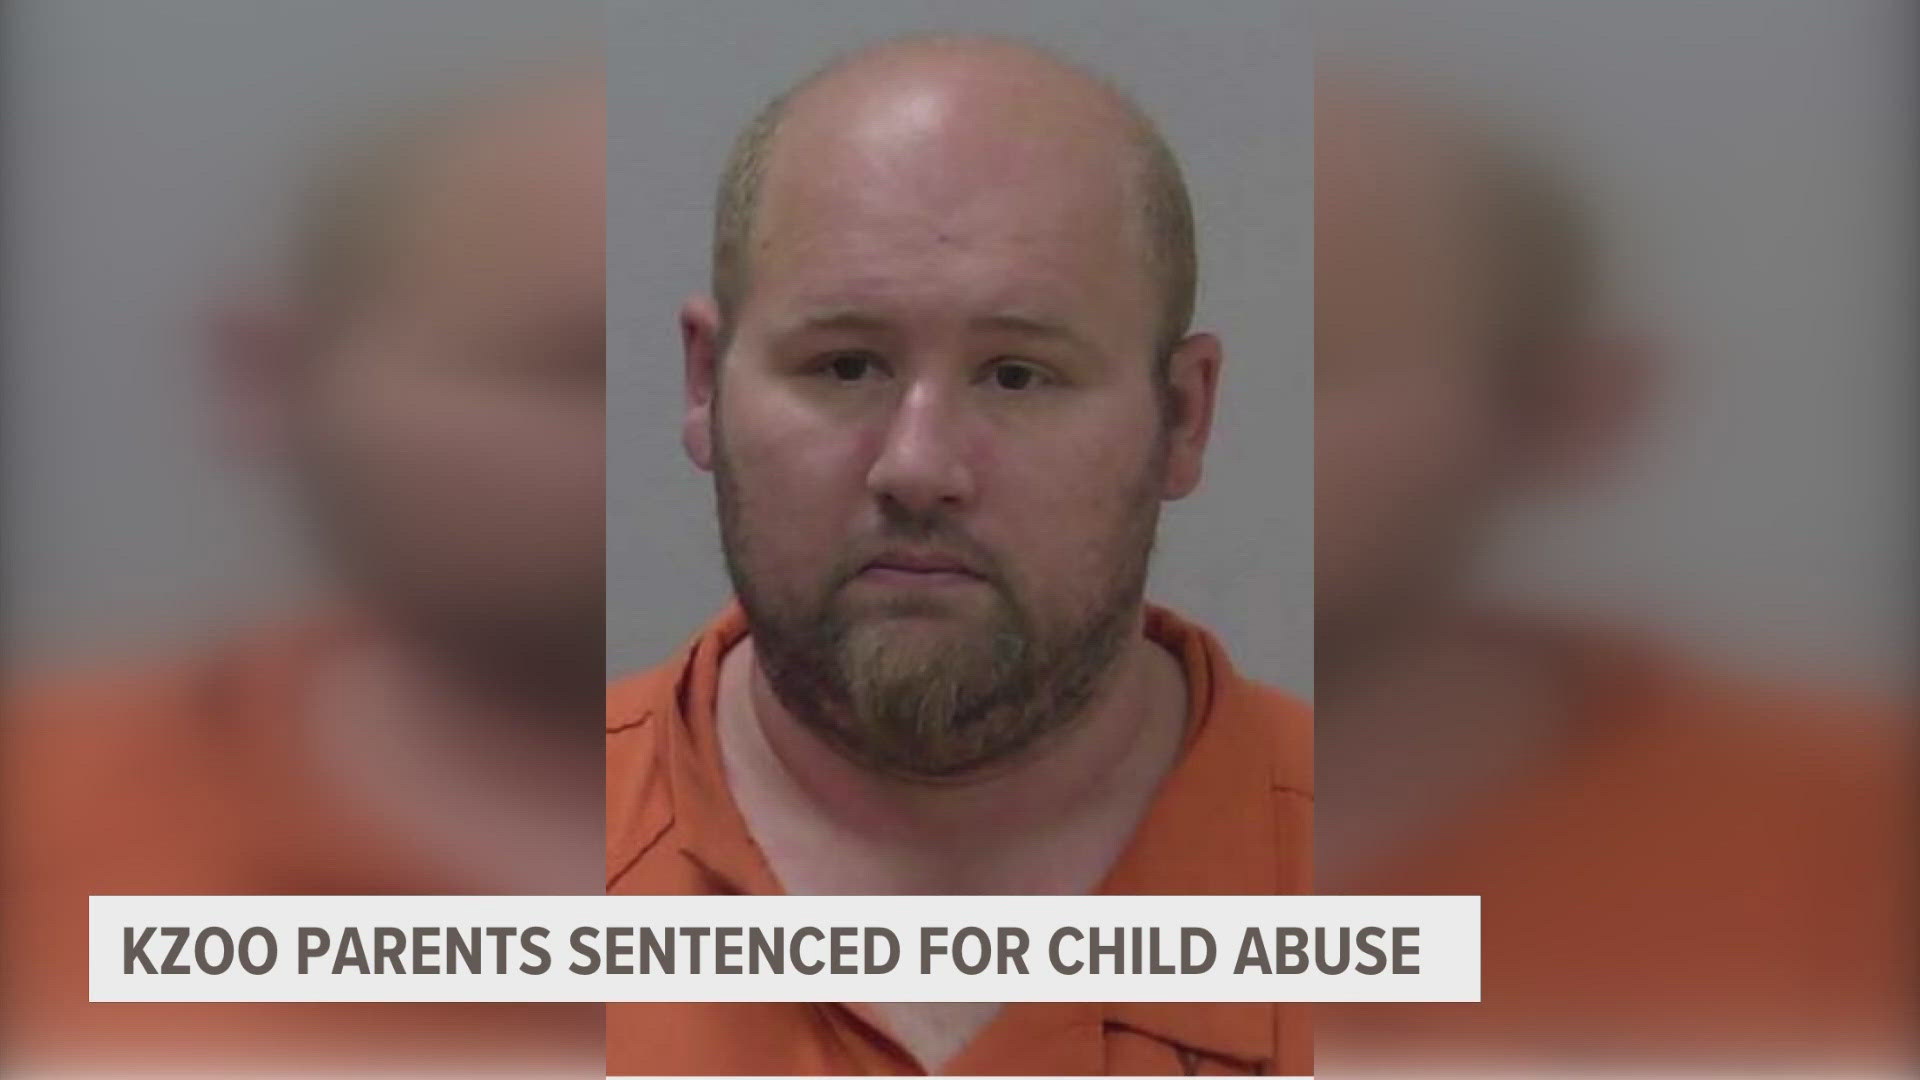 Court documents showed Paul Preston admitted to the abuse, including squeezing his baby's head with both hands and throwing the baby onto a bed.